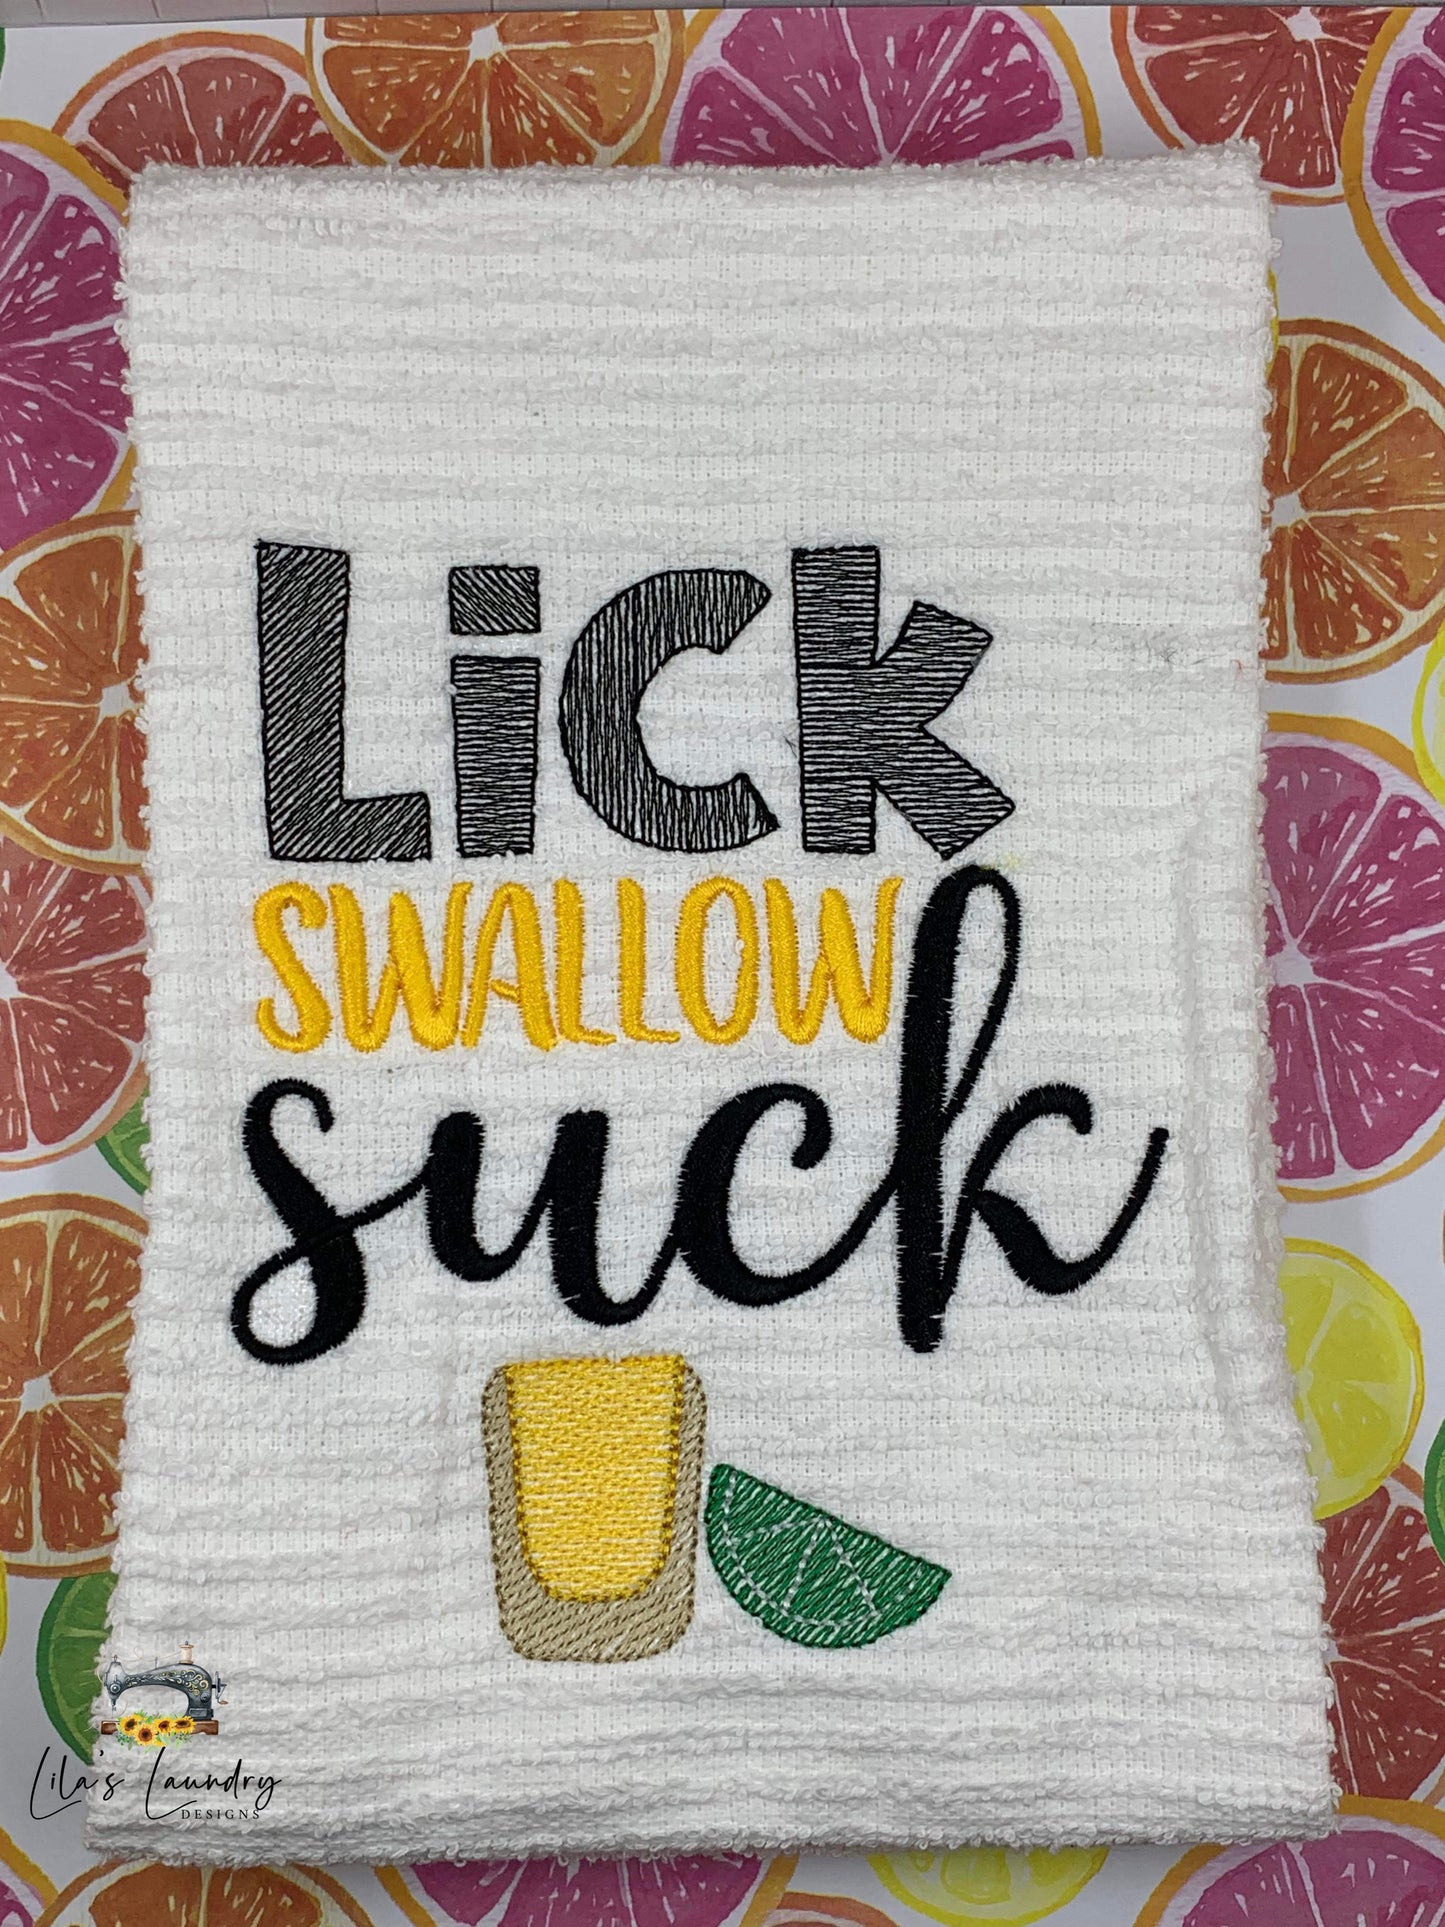 Lick Swallow Suck - 4 Sizes - Digital Embroidery Design